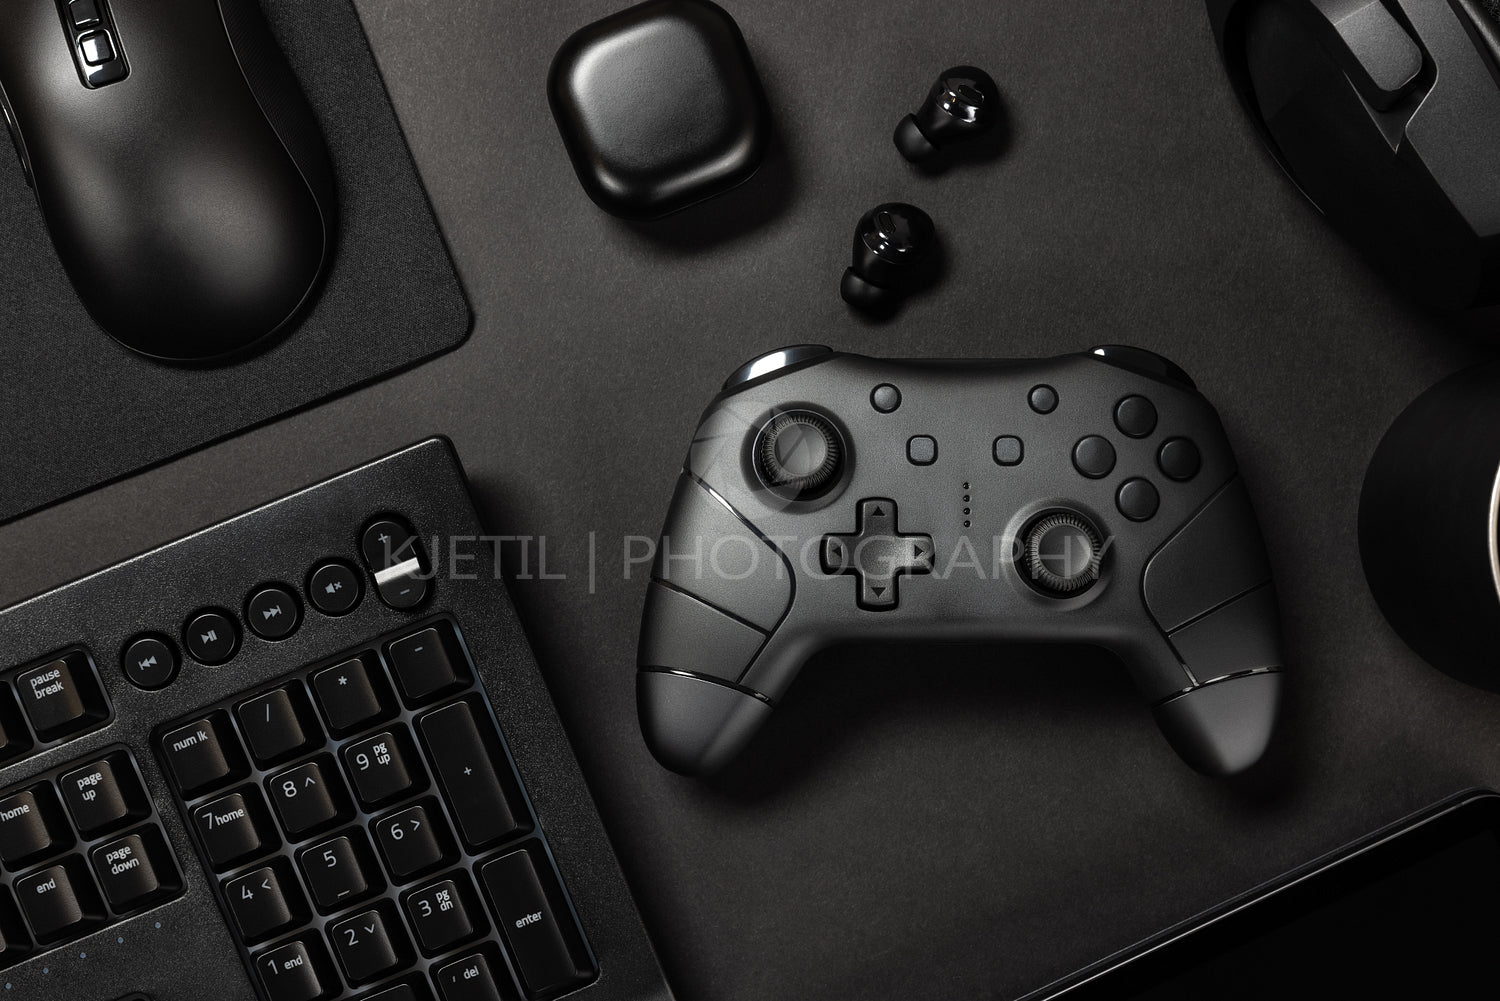 Gaming controller amidst various modern devices